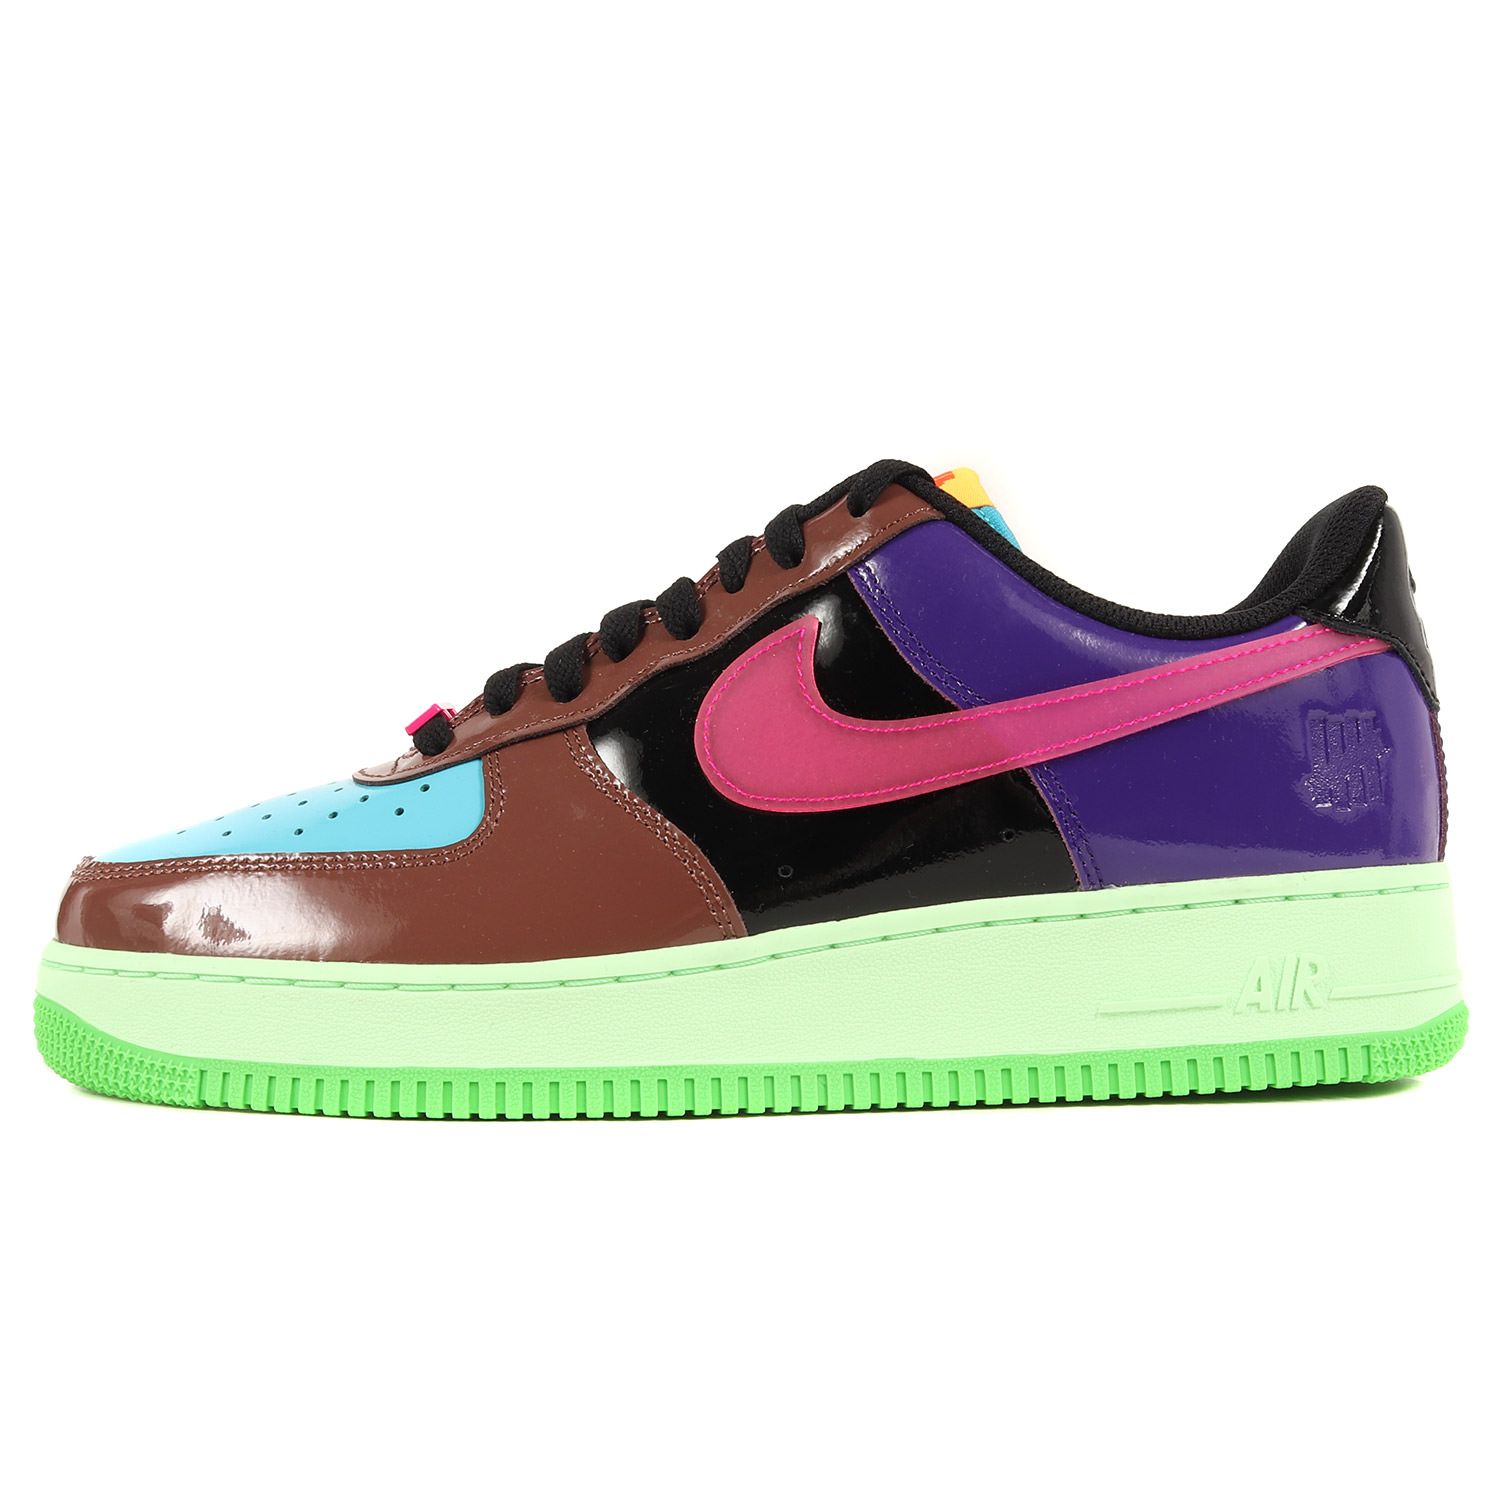 NIKE UNDEFEATED AIR FORCE 1 LOW SP 28cm - BEEGLE by BooBee - メルカリ